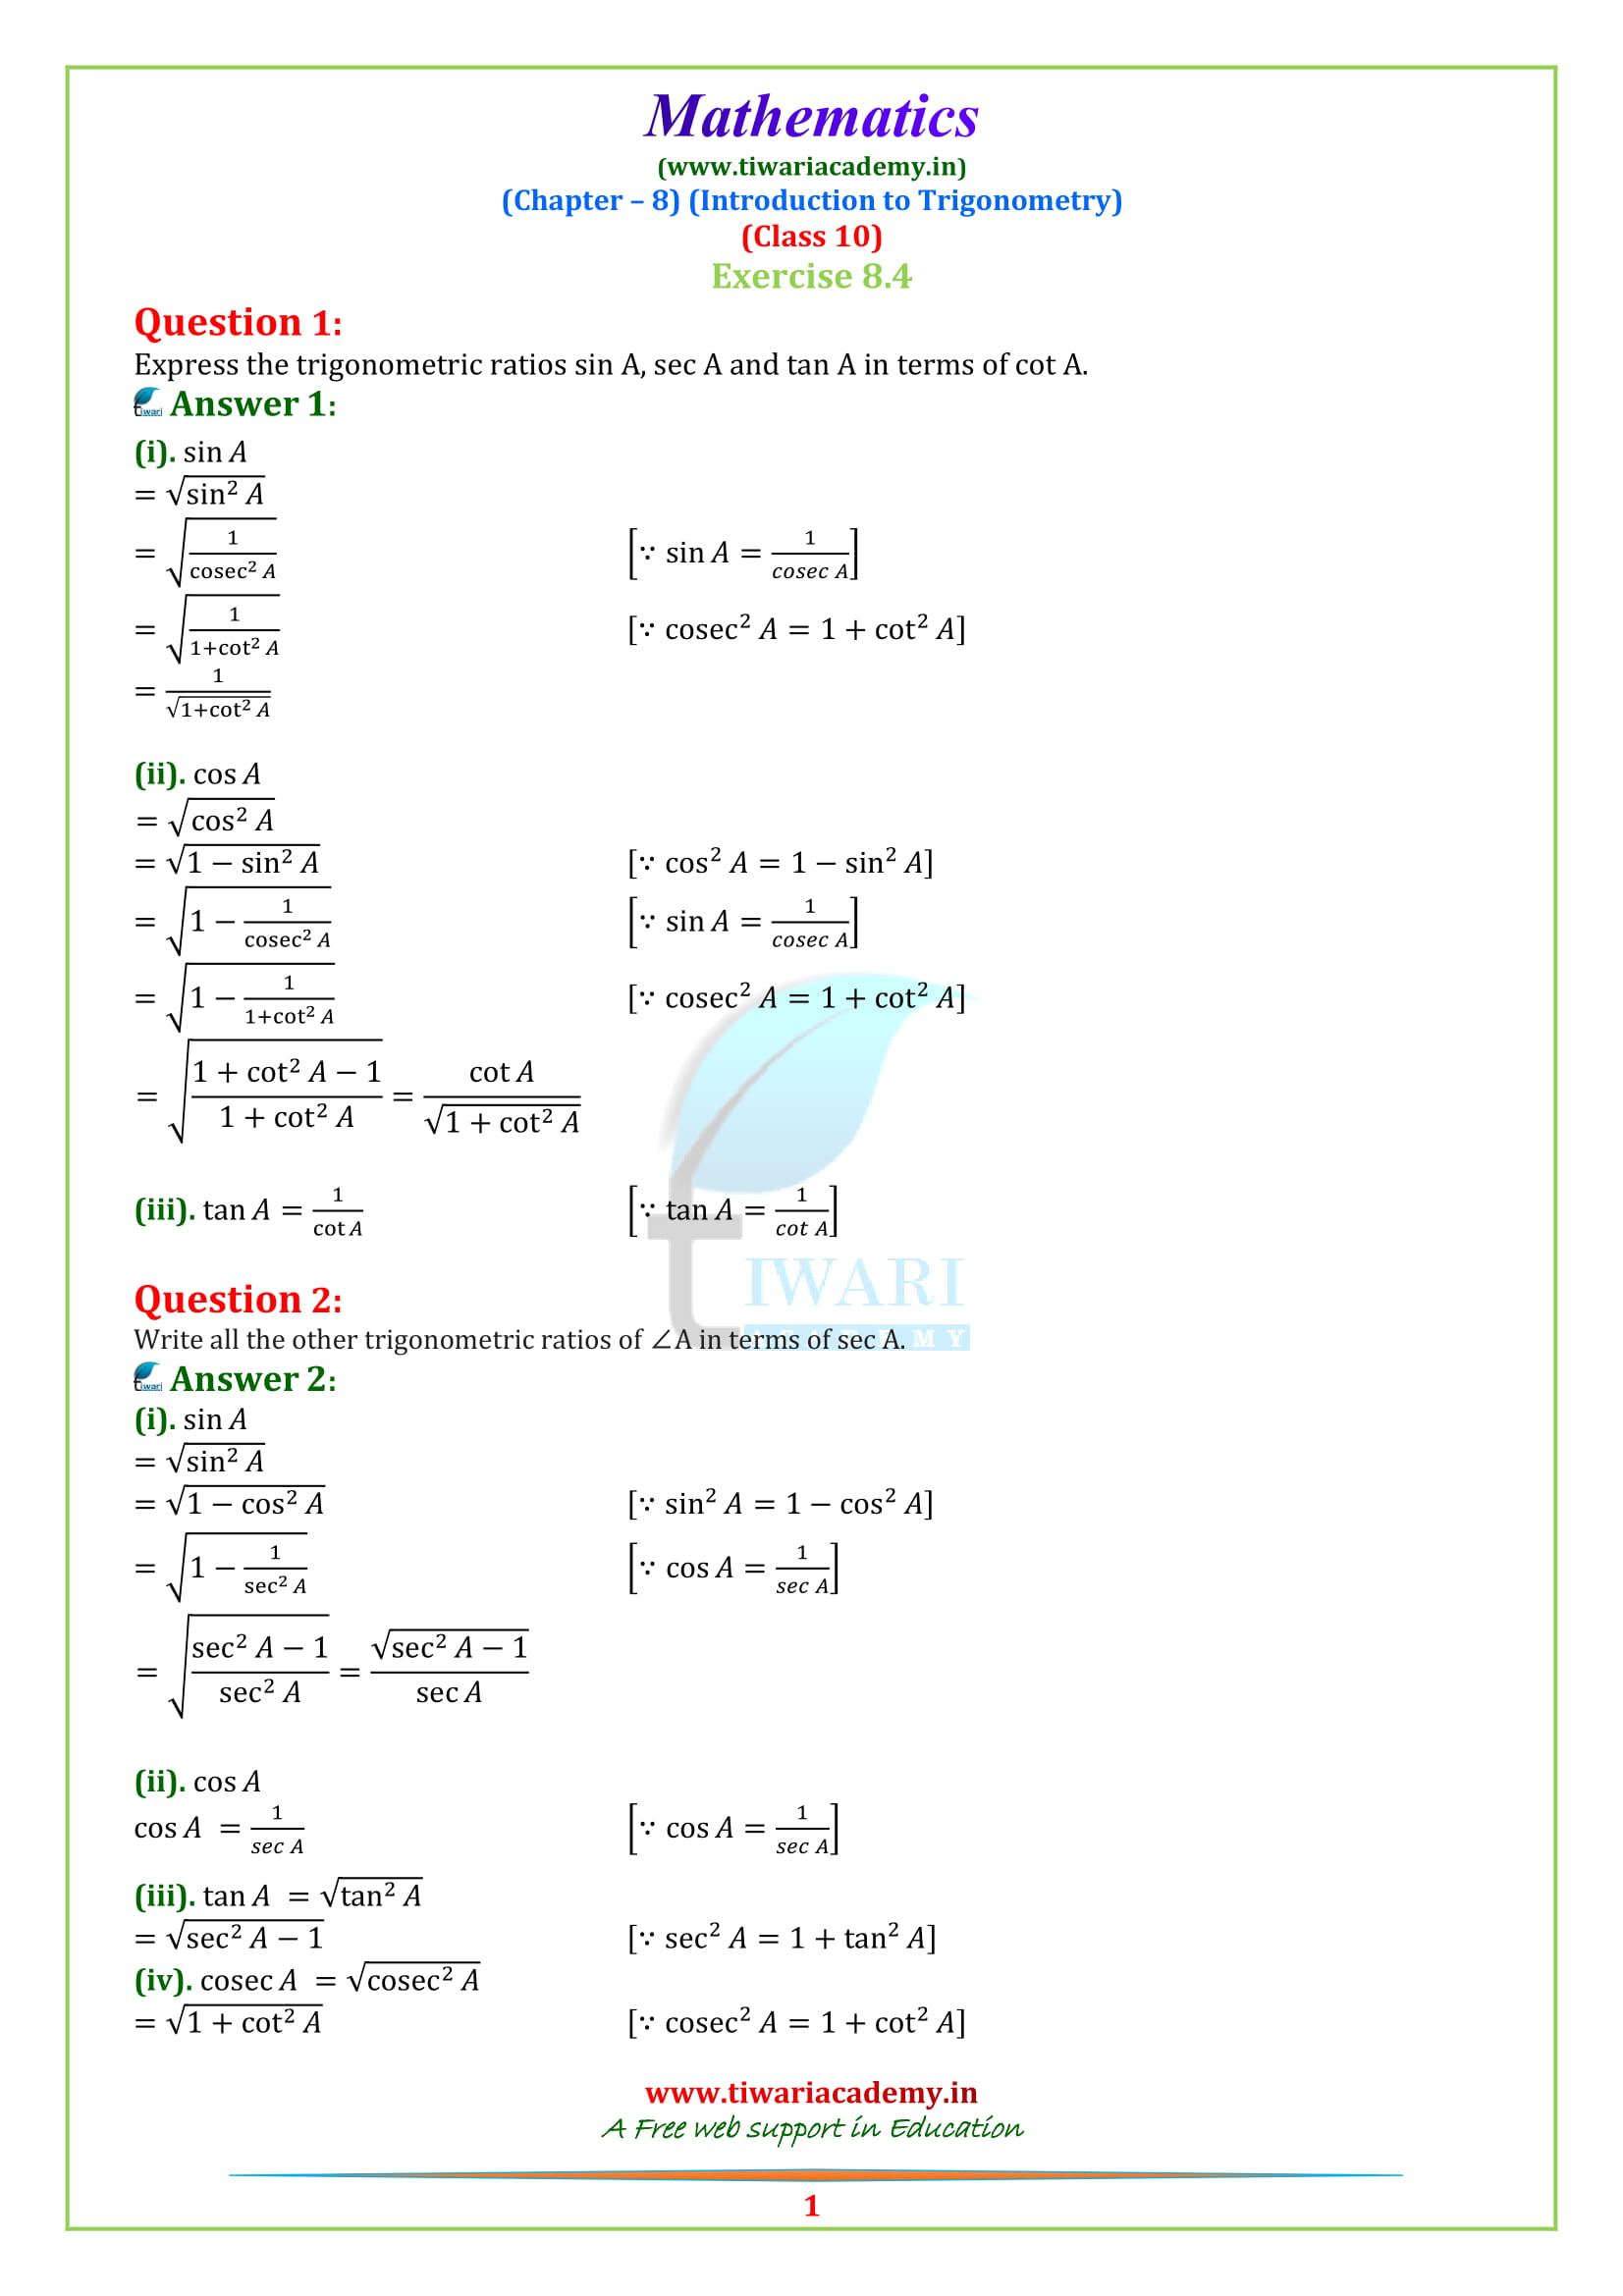 NCERT Solutions for class 10 Maths Chapter 8 Exercise 8.4 all questions